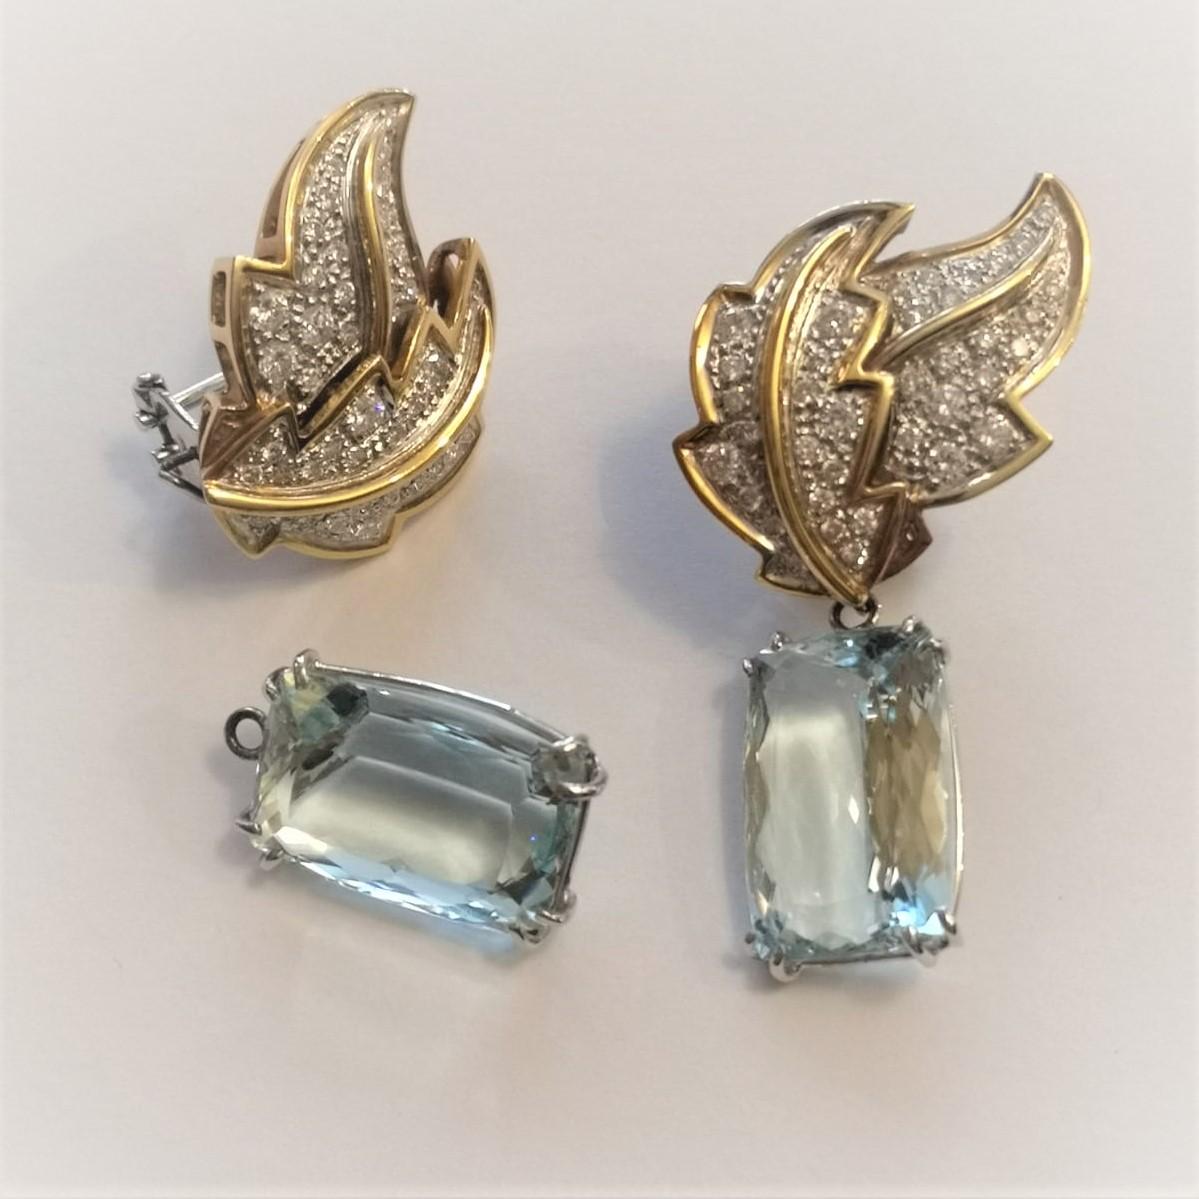 Drop Earrings with 27.00 Total Carat Aquamarine and  1.00 Carat Round Brilliant Cut Diamonds.
The upper part of the earrings is  white and yellow gold 18 Kt.

The high quality of this jewels is the expression of the skilful work of our goldsmiths